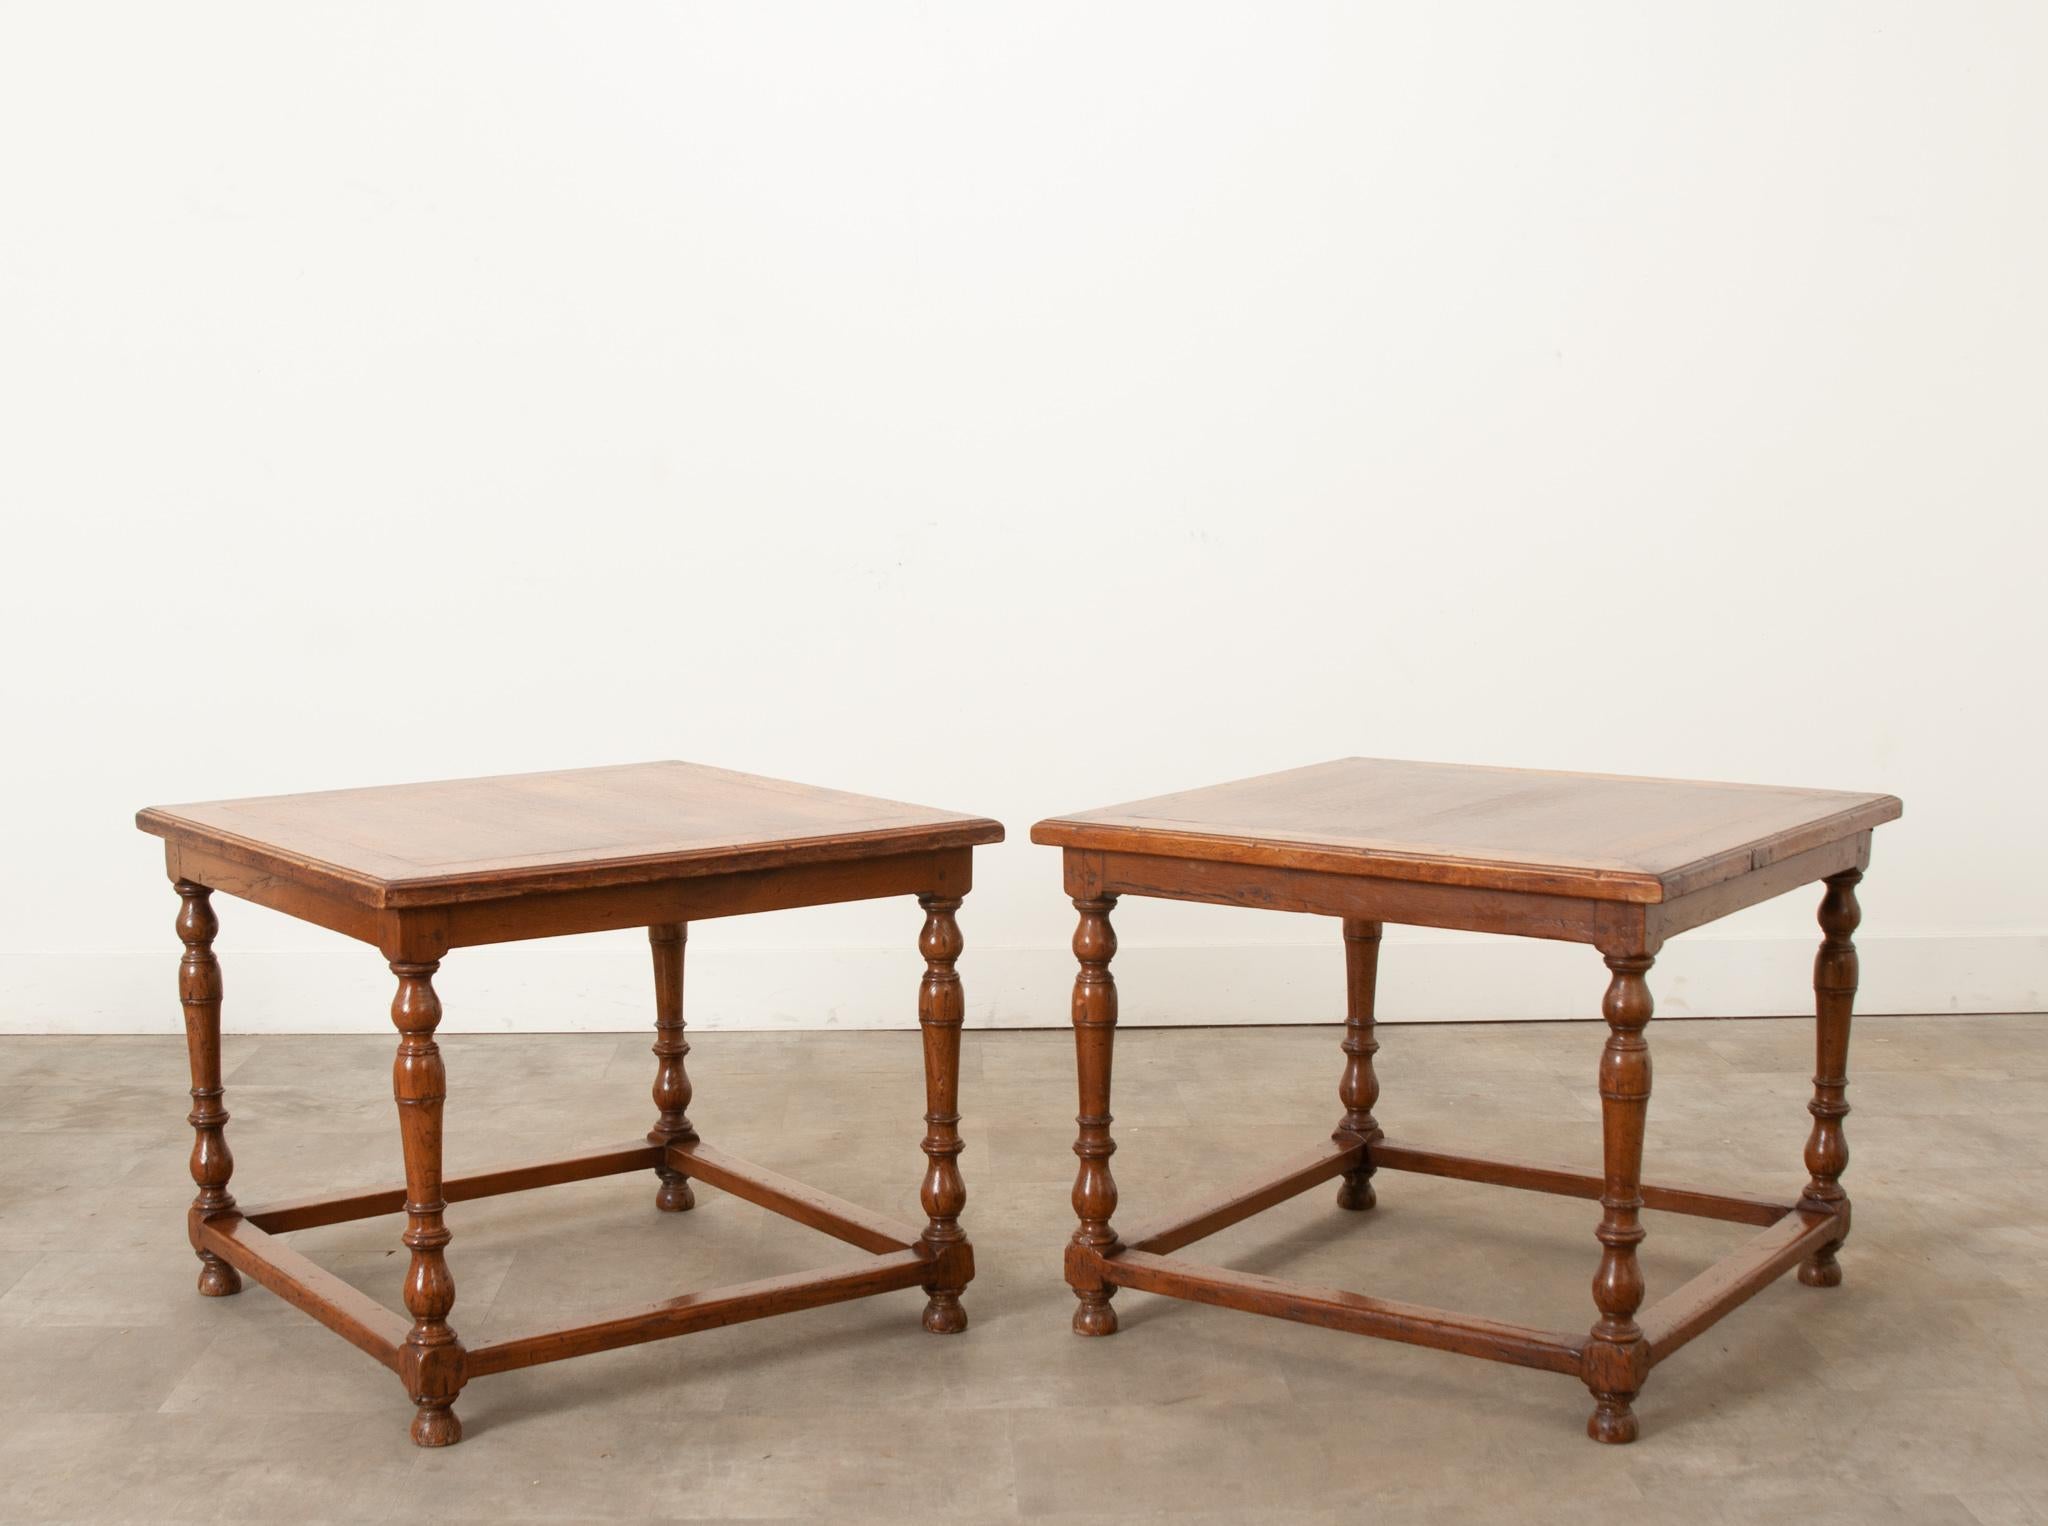 This pair of square ends tables are built of solid oak with wood peg construction. The large square size of this pair of tables make them perfect for flanking a sofa or using as a coffee table. Turned oak legs are connected by a stretcher making